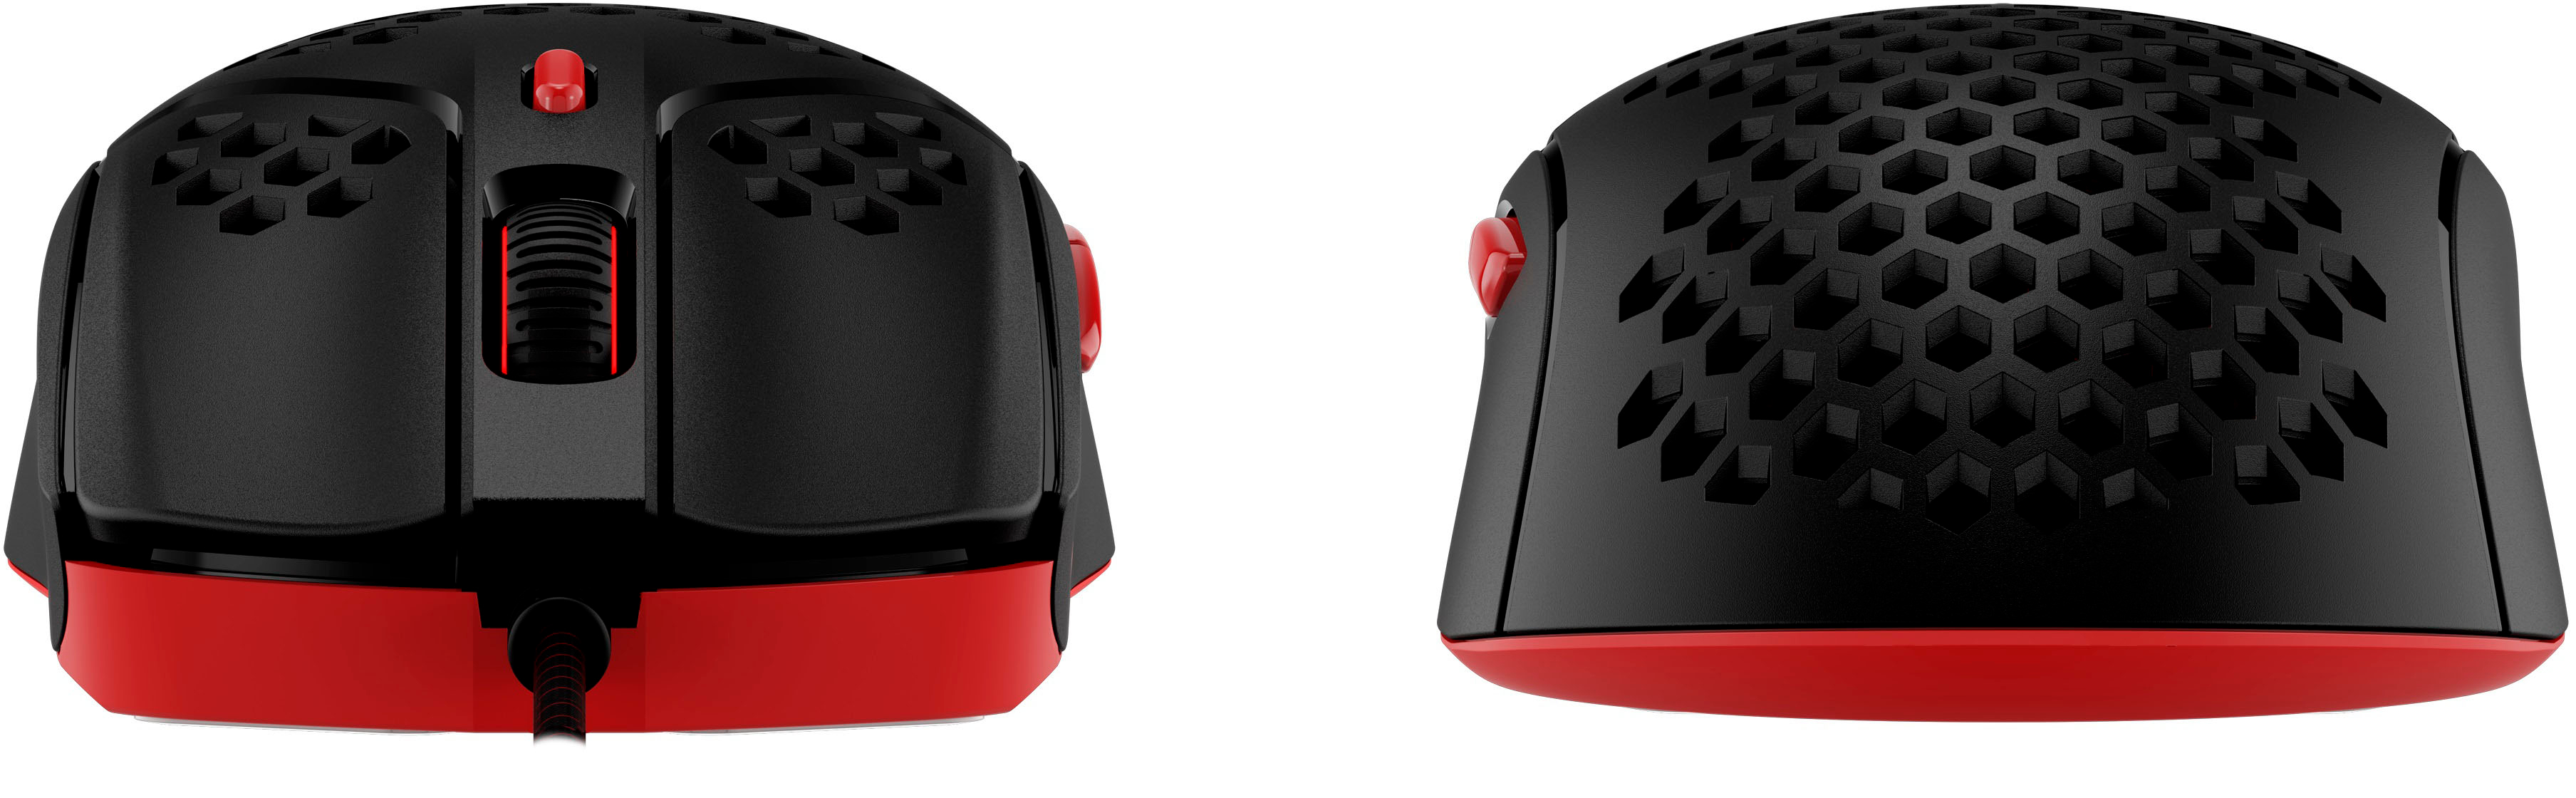 Left View: HyperX - Pulsefire Haste Lightweight Wired Optical Gaming Right-handed Mouse with RGB Lighting - Black and red